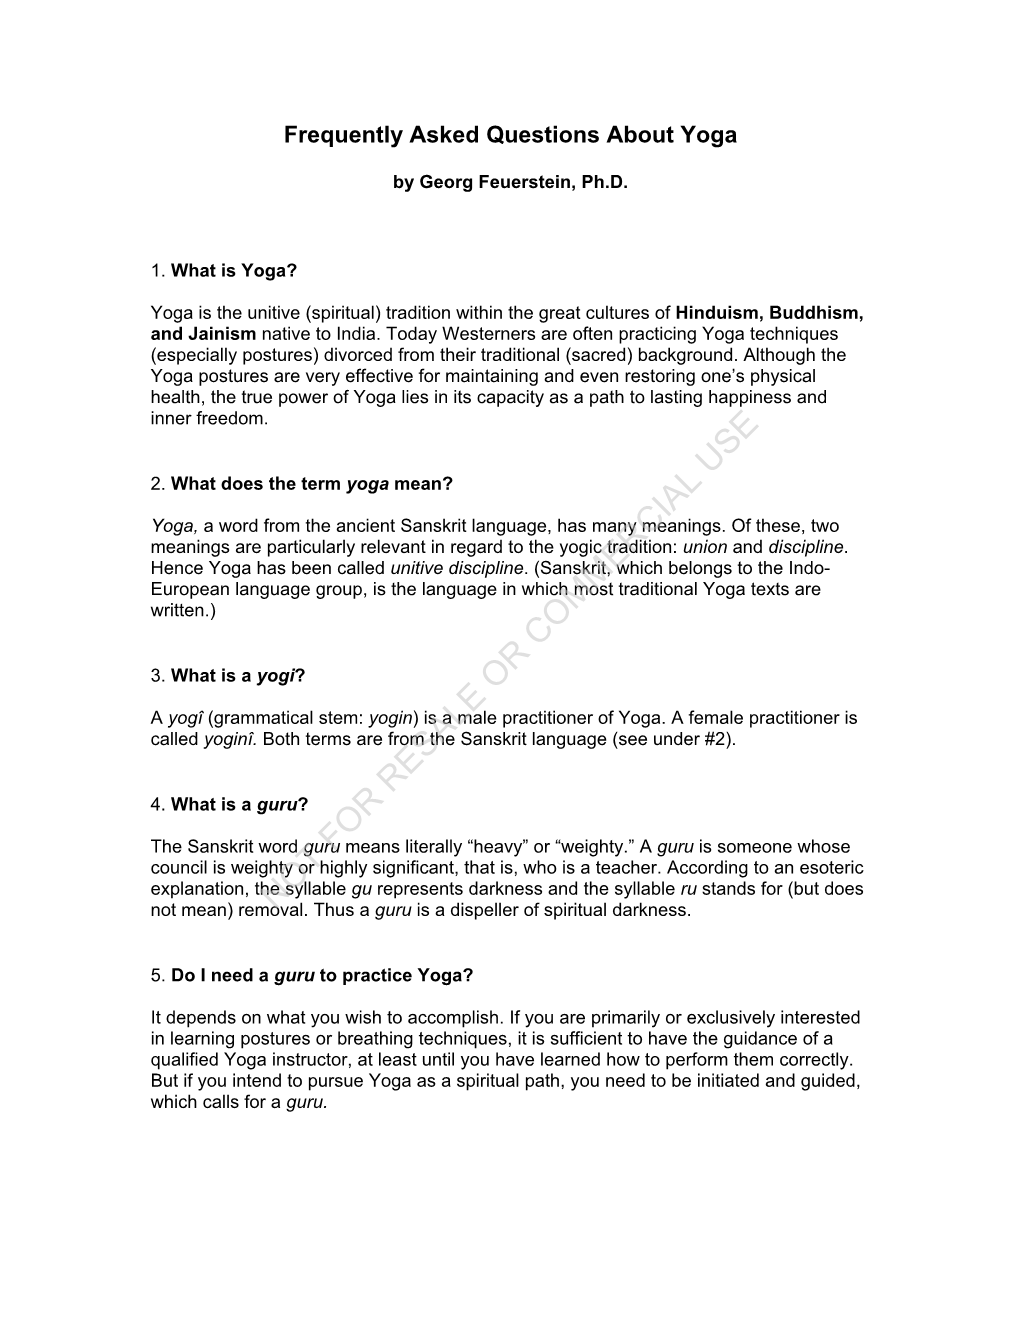 Frequently Asked Questions About Yoga by Georg Feuerstein, Ph.D